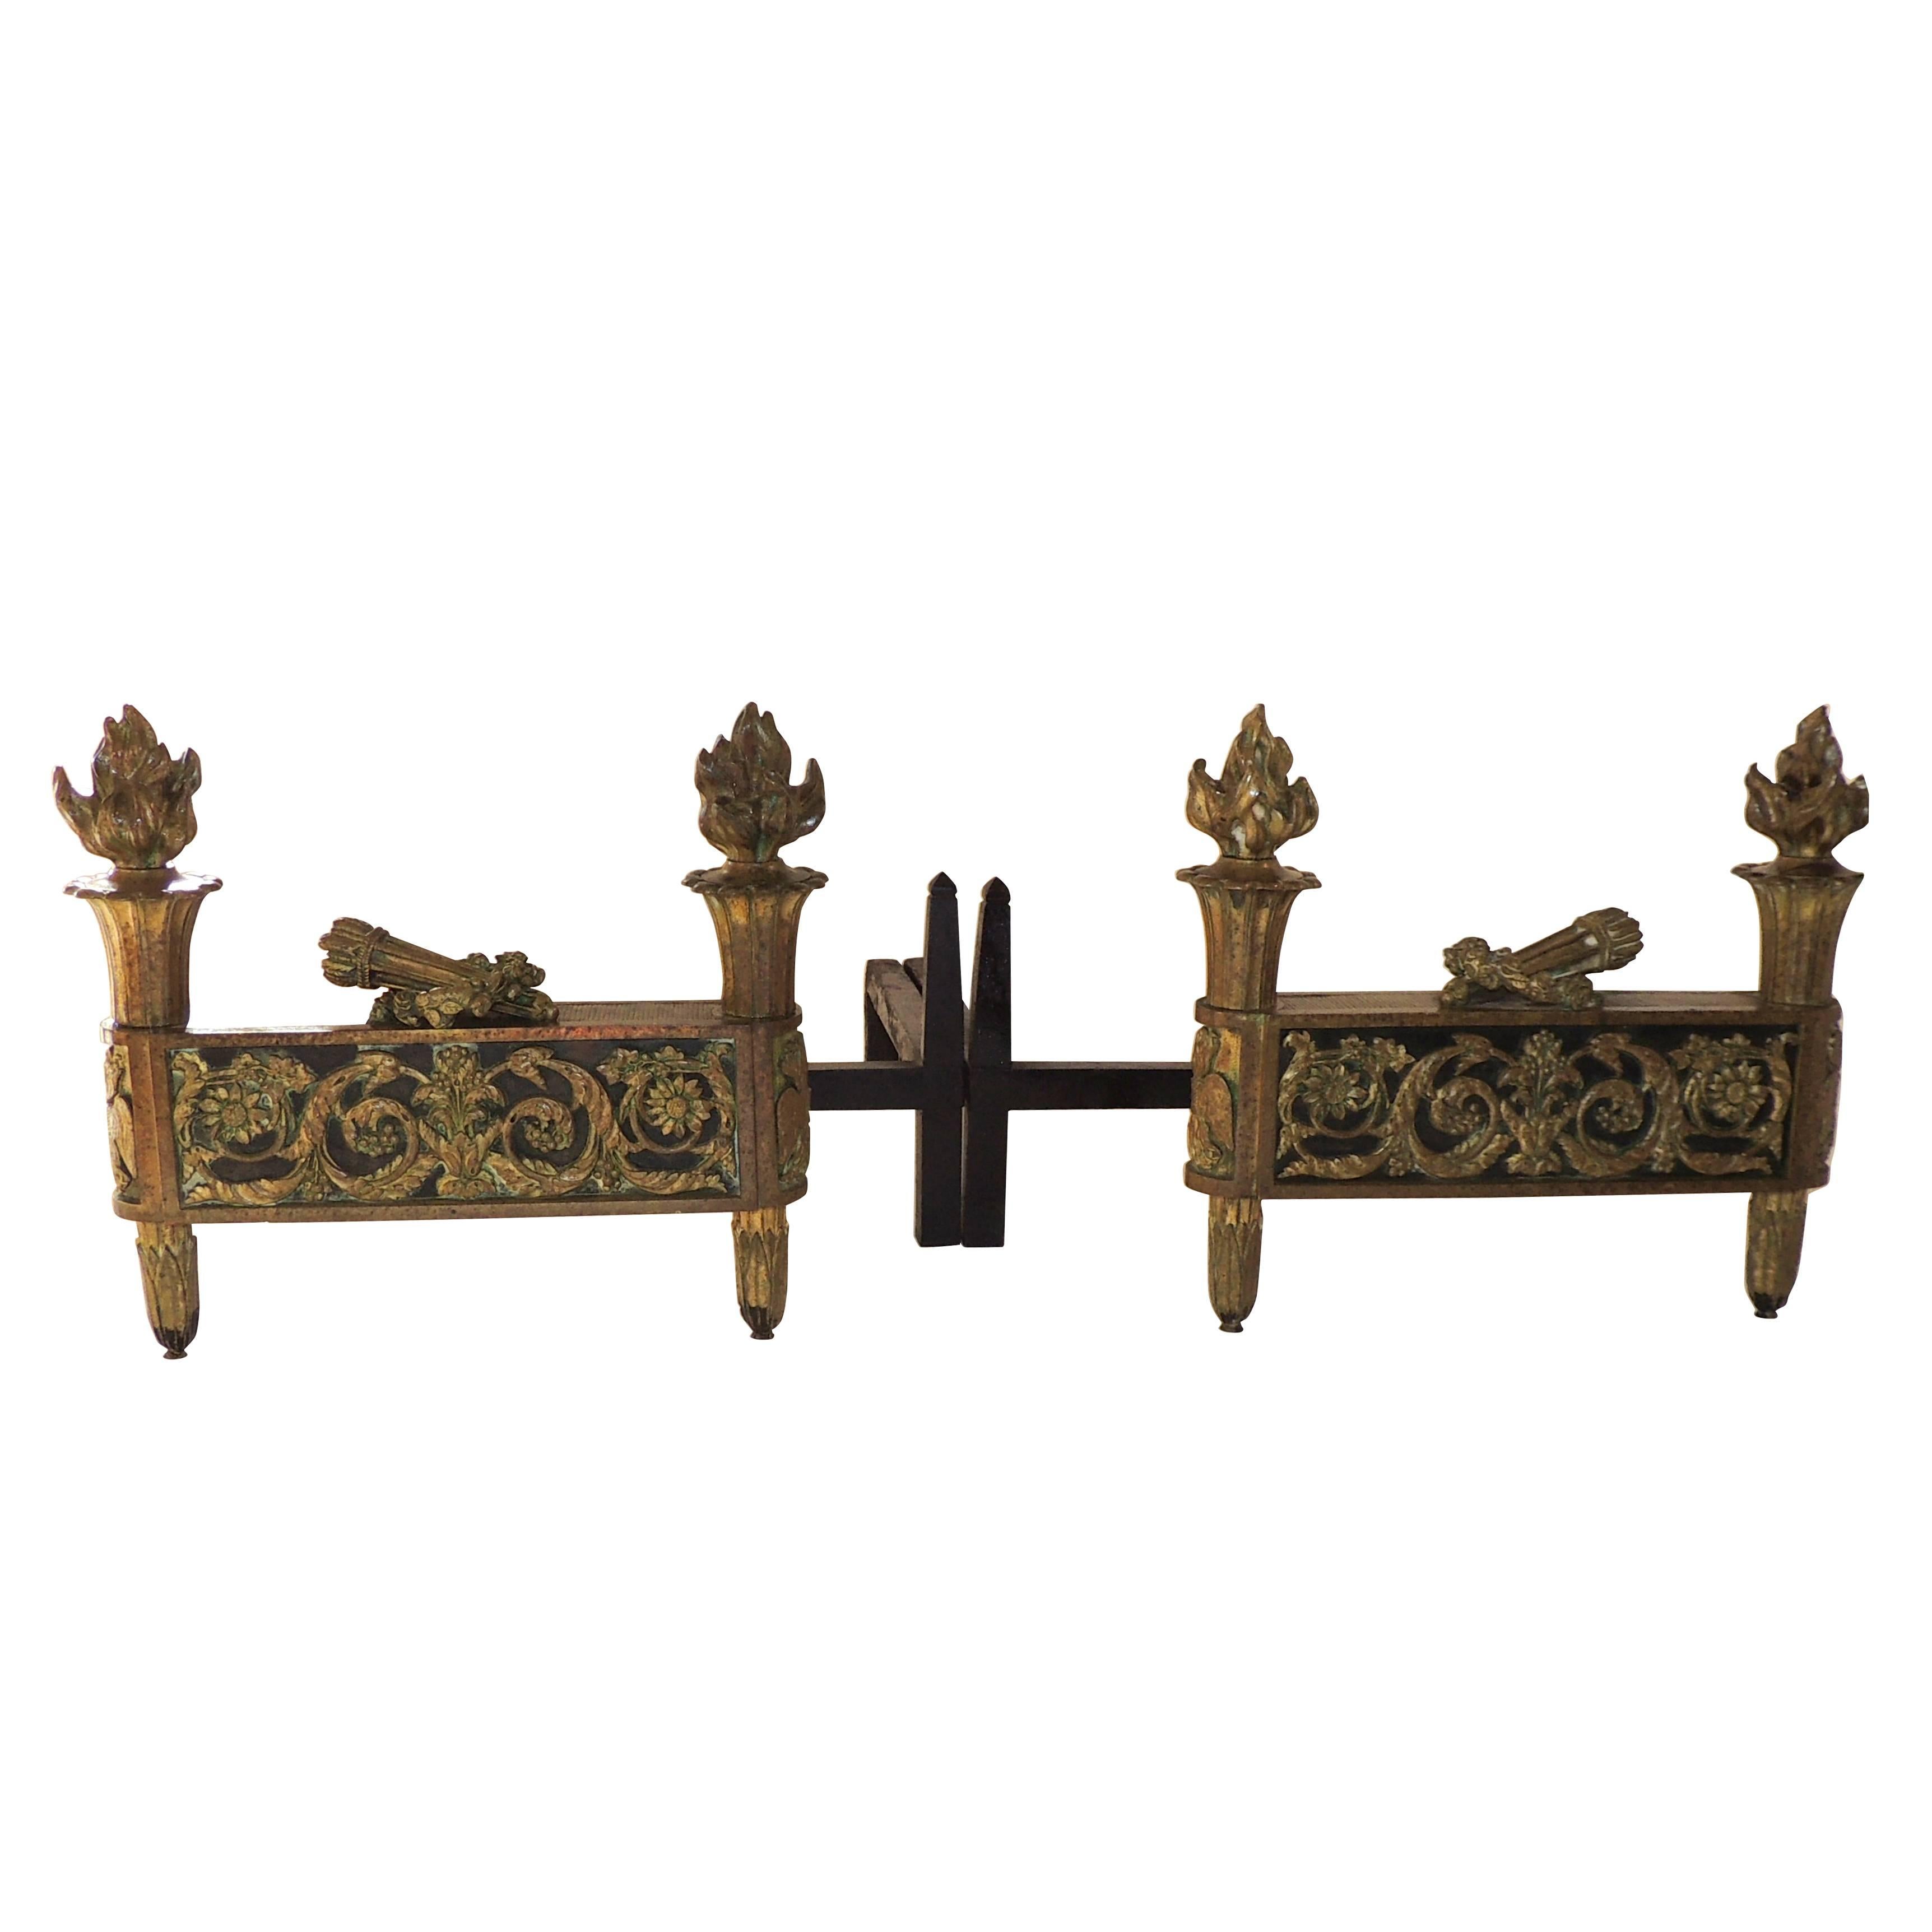 Wonderful French Neoclassical Gilt Dore Bronze with Black Marble Insert Chenets For Sale